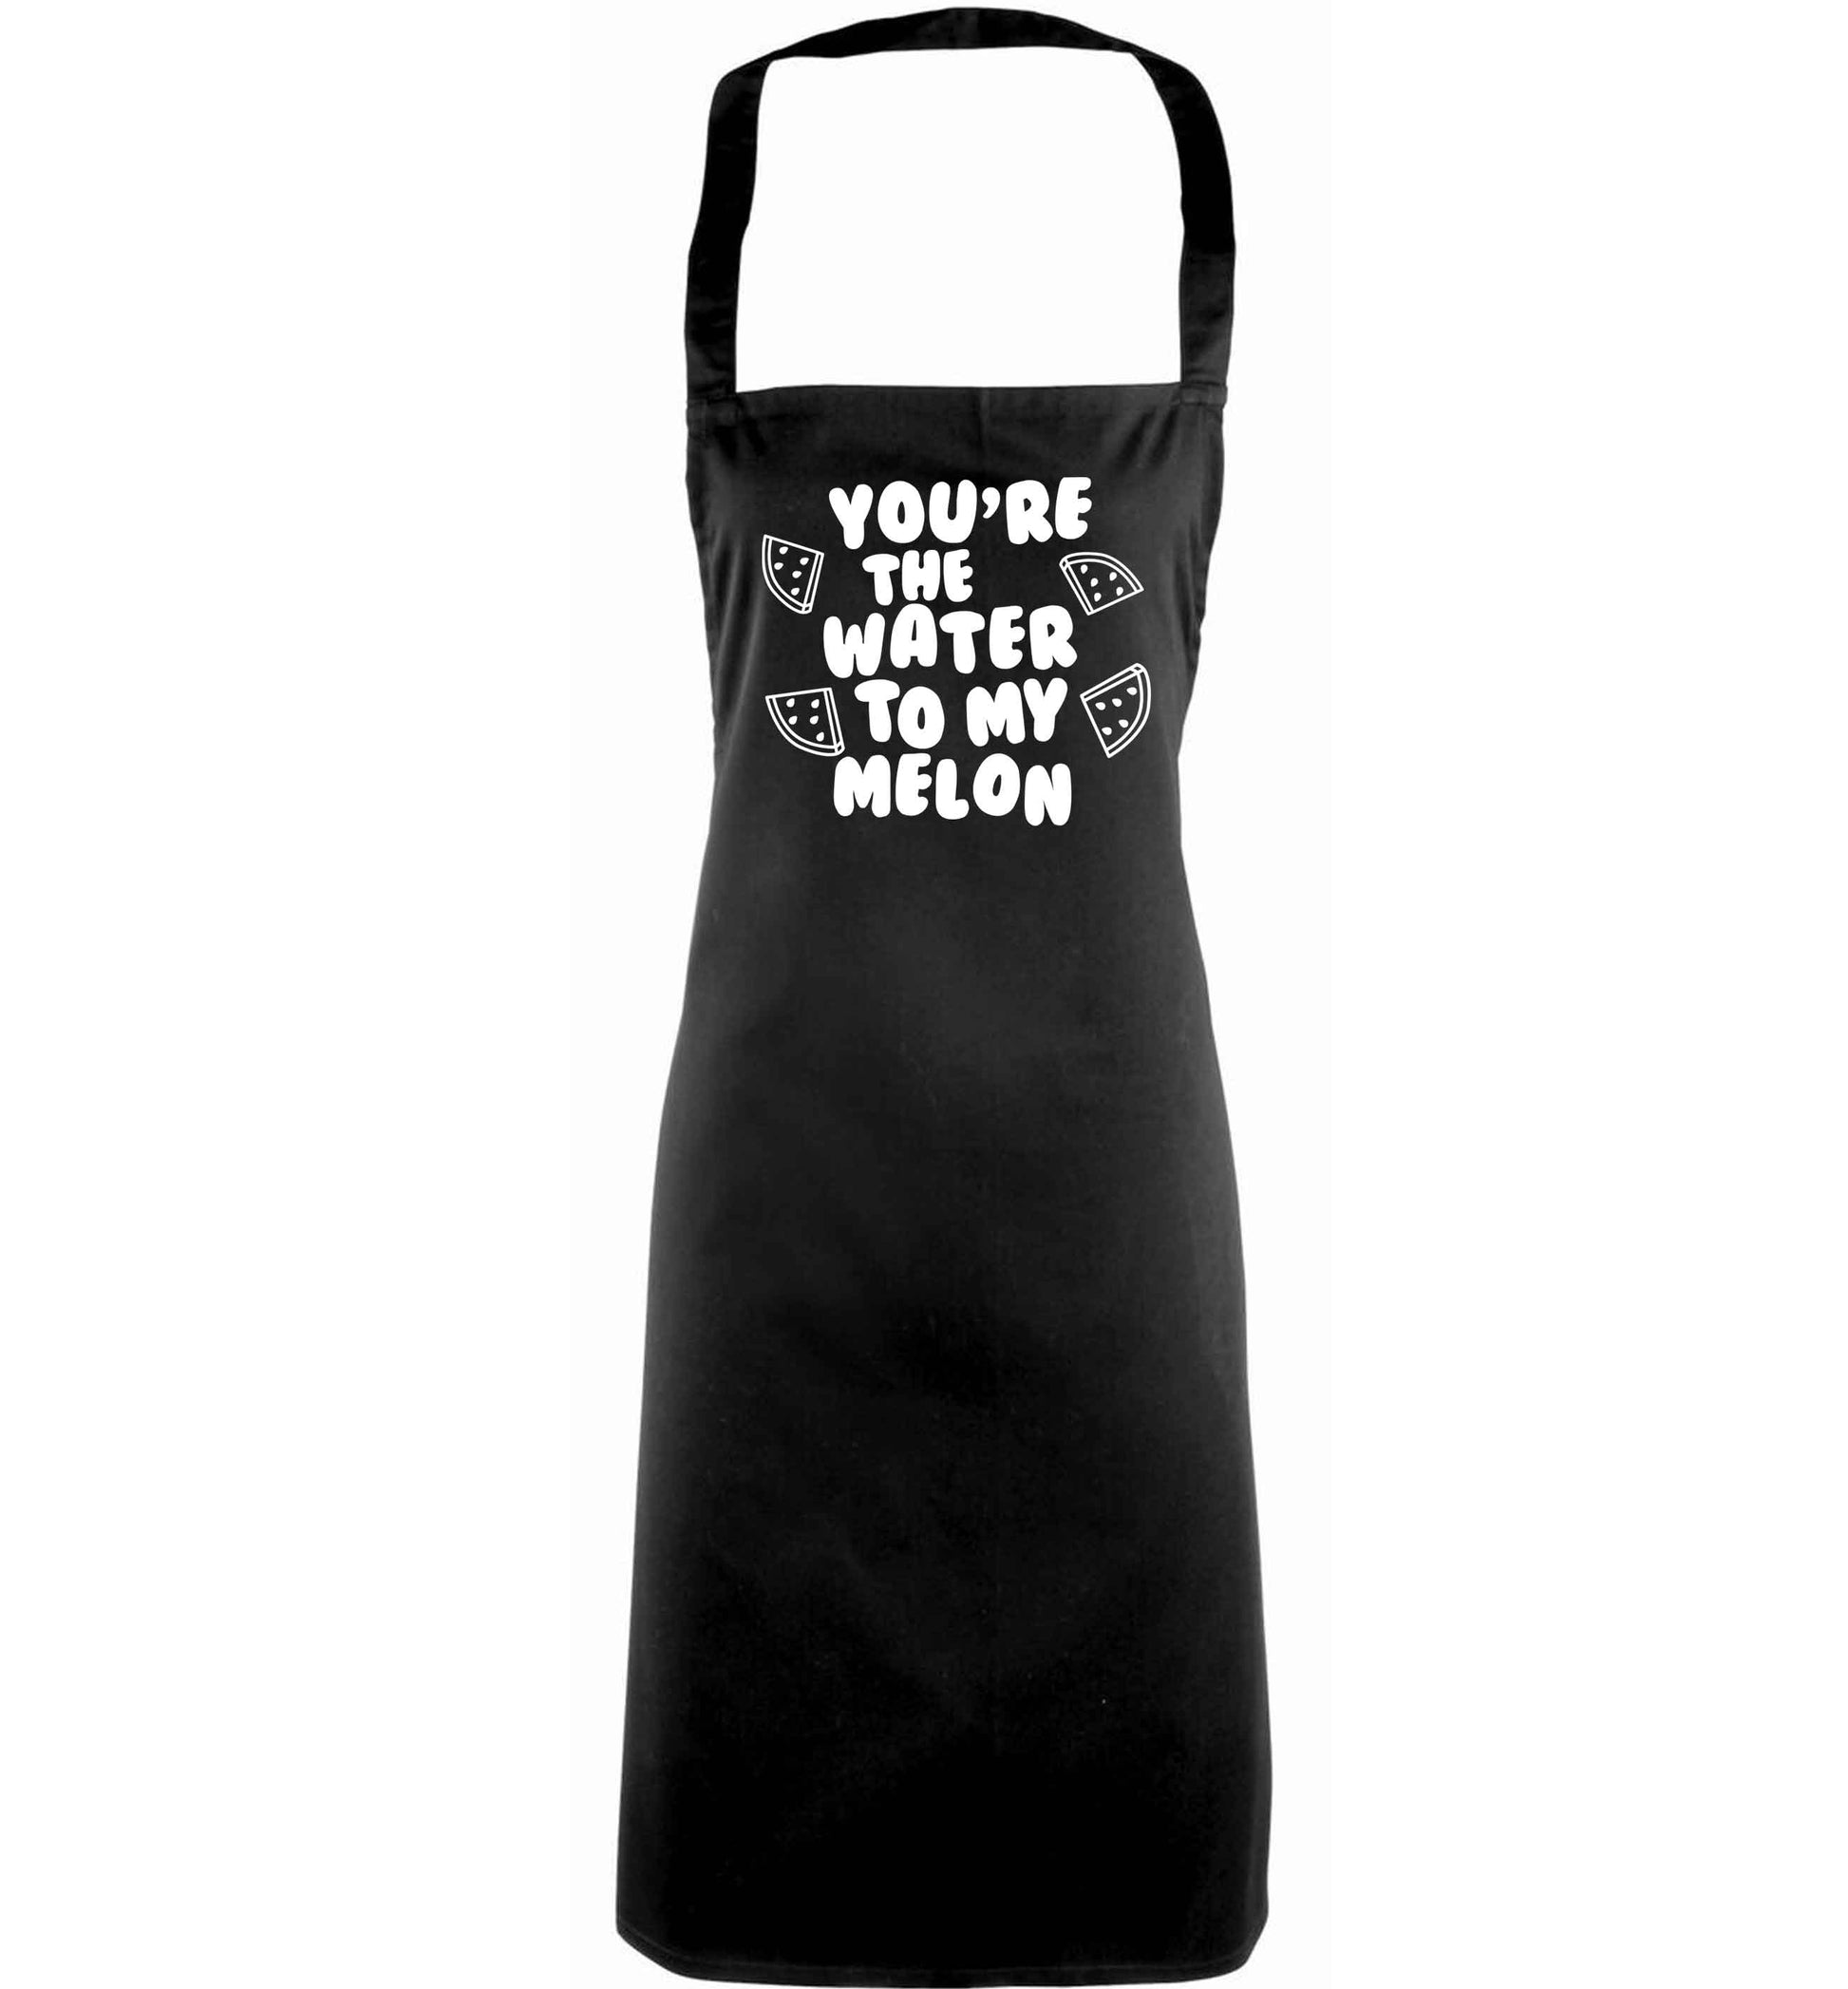 You're the water to my melon adults black apron